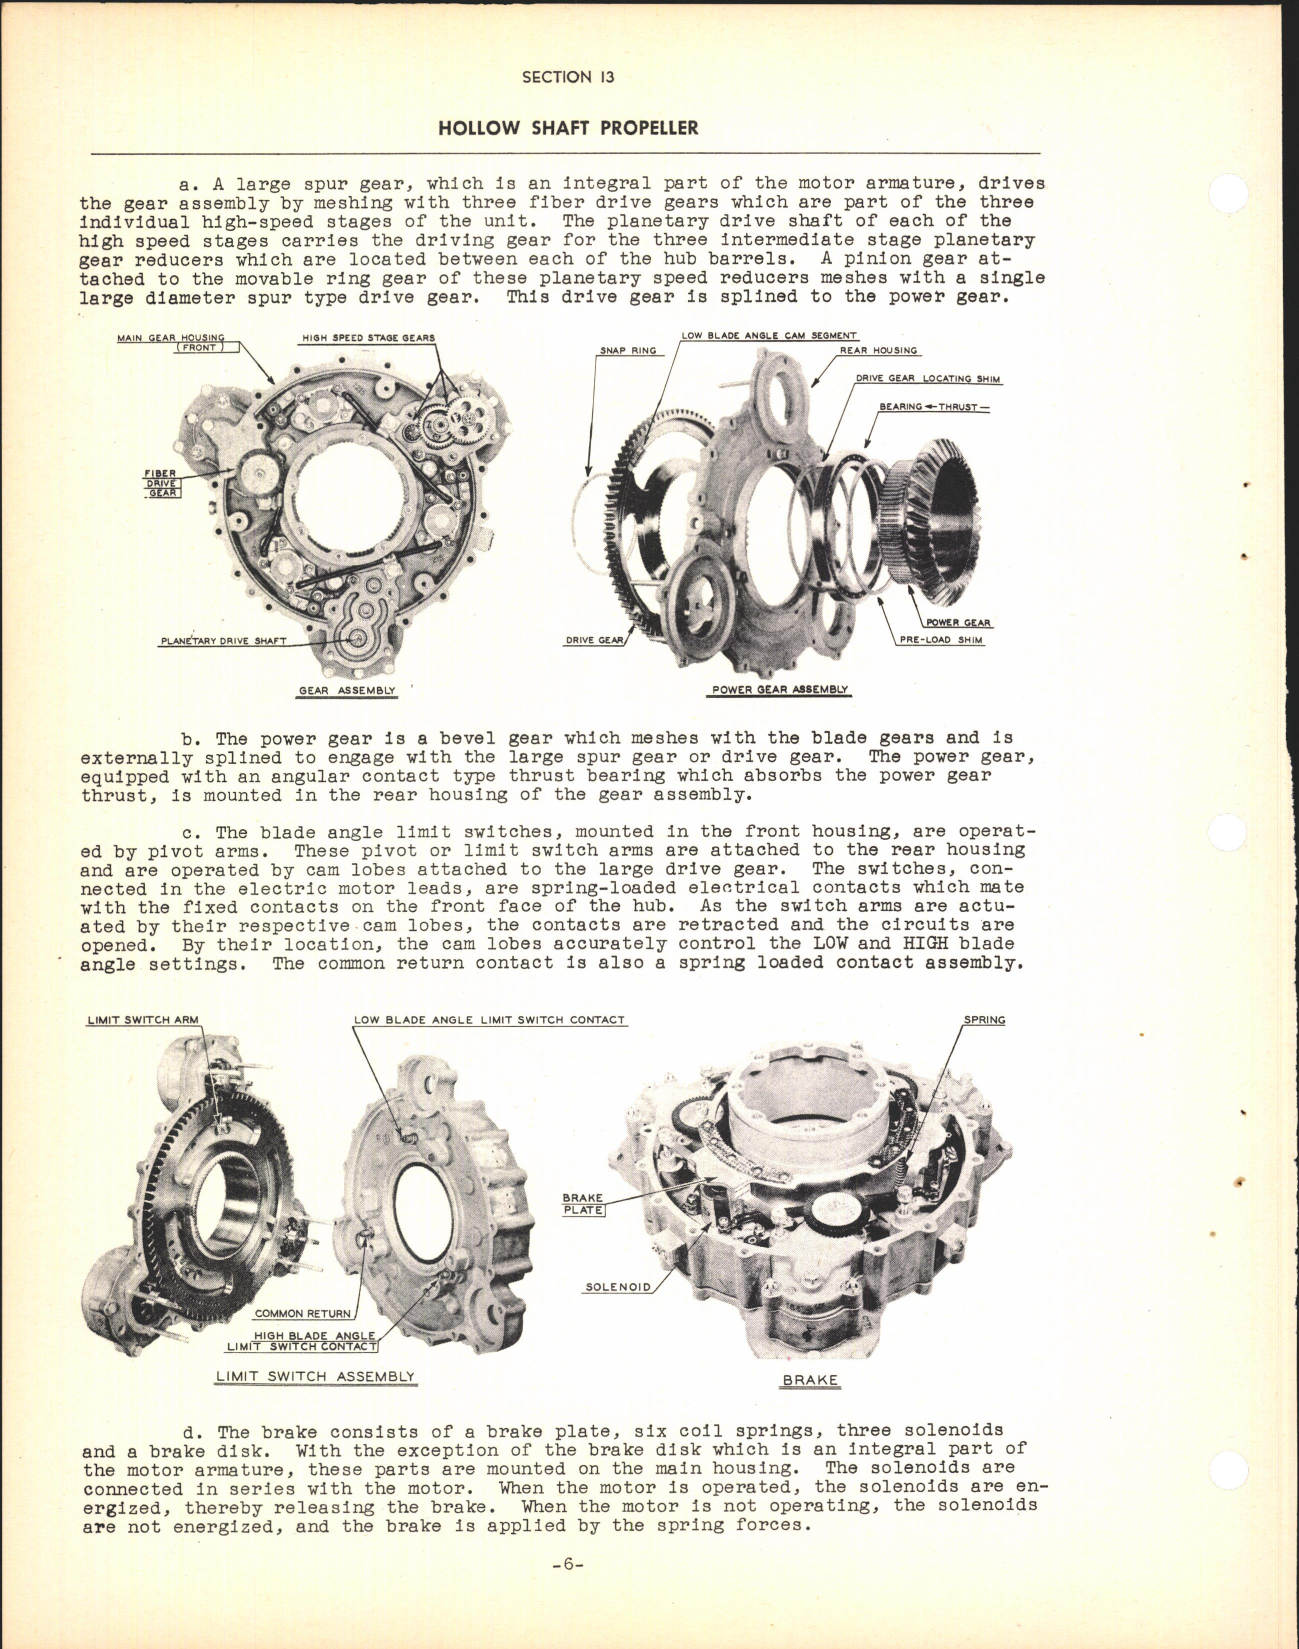 Sample page 8 from AirCorps Library document: Section 13 - Hollow Shaft Propeller (Three Blade)